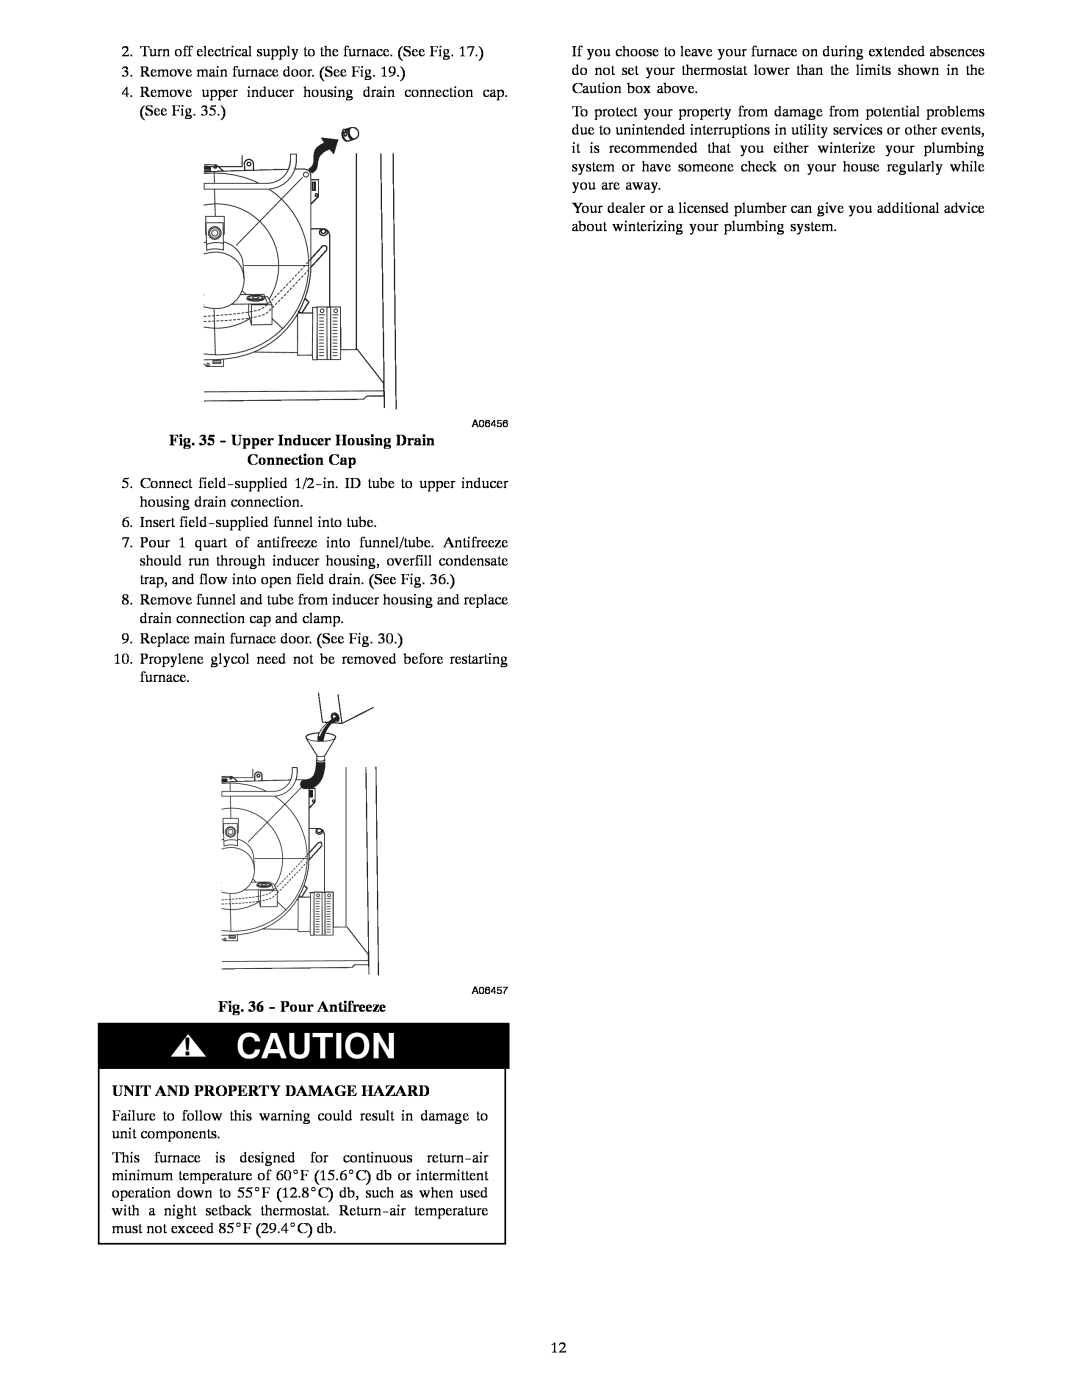 Bryant 355CAV owner manual Upper Inducer Housing Drain, Connection Cap, Pour Antifreeze, Unit And Property Damage Hazard 